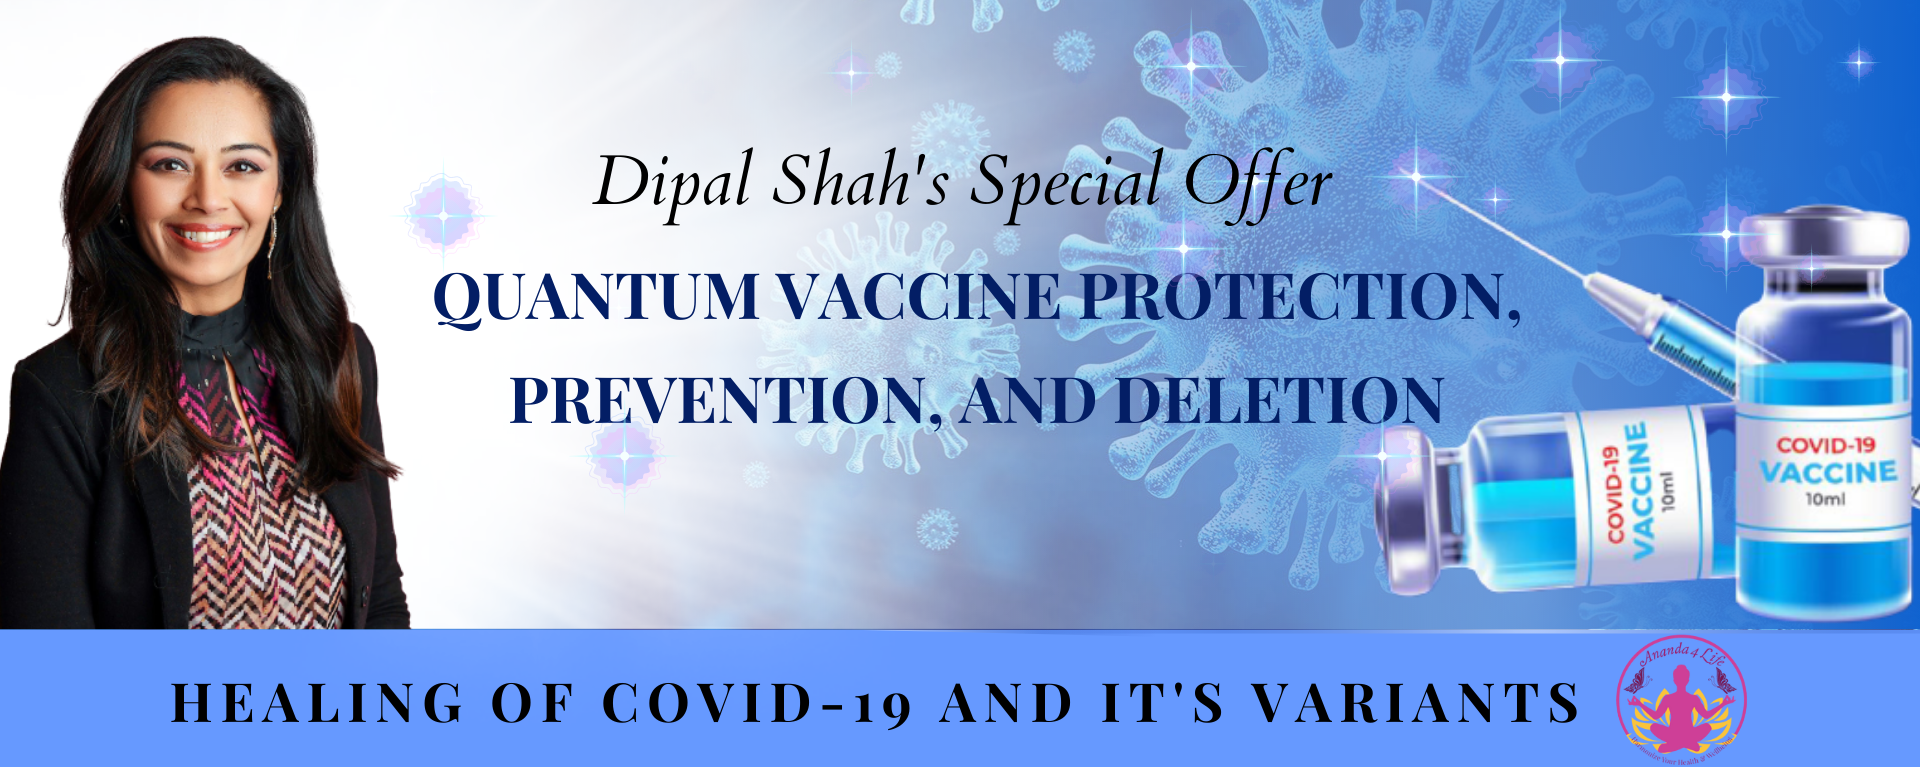 Covid Vaccine Protection Package 1